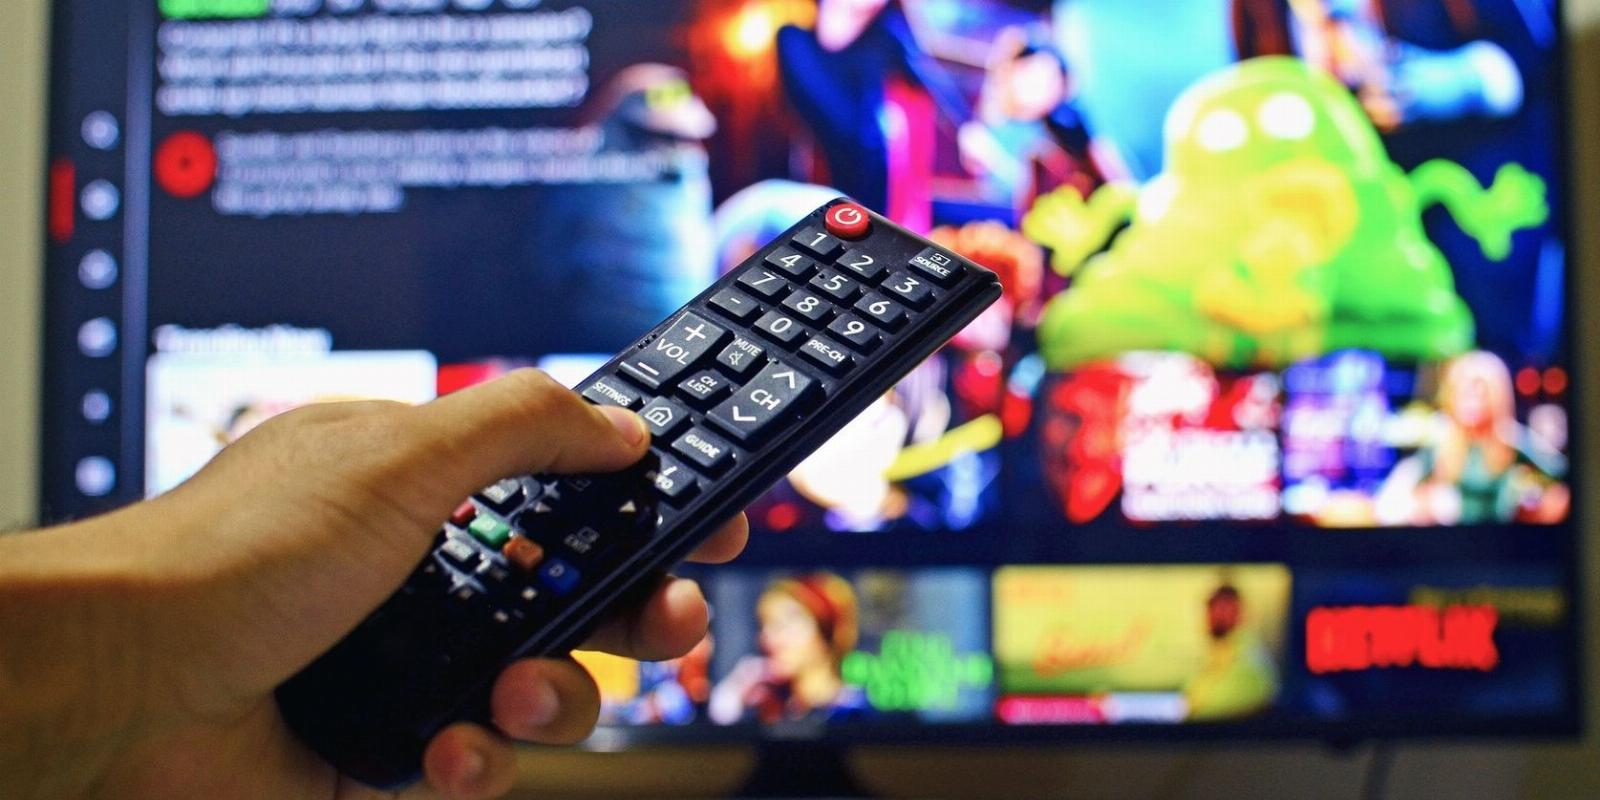 15 Ways to Protect Your Smart TV from Cyberattacks